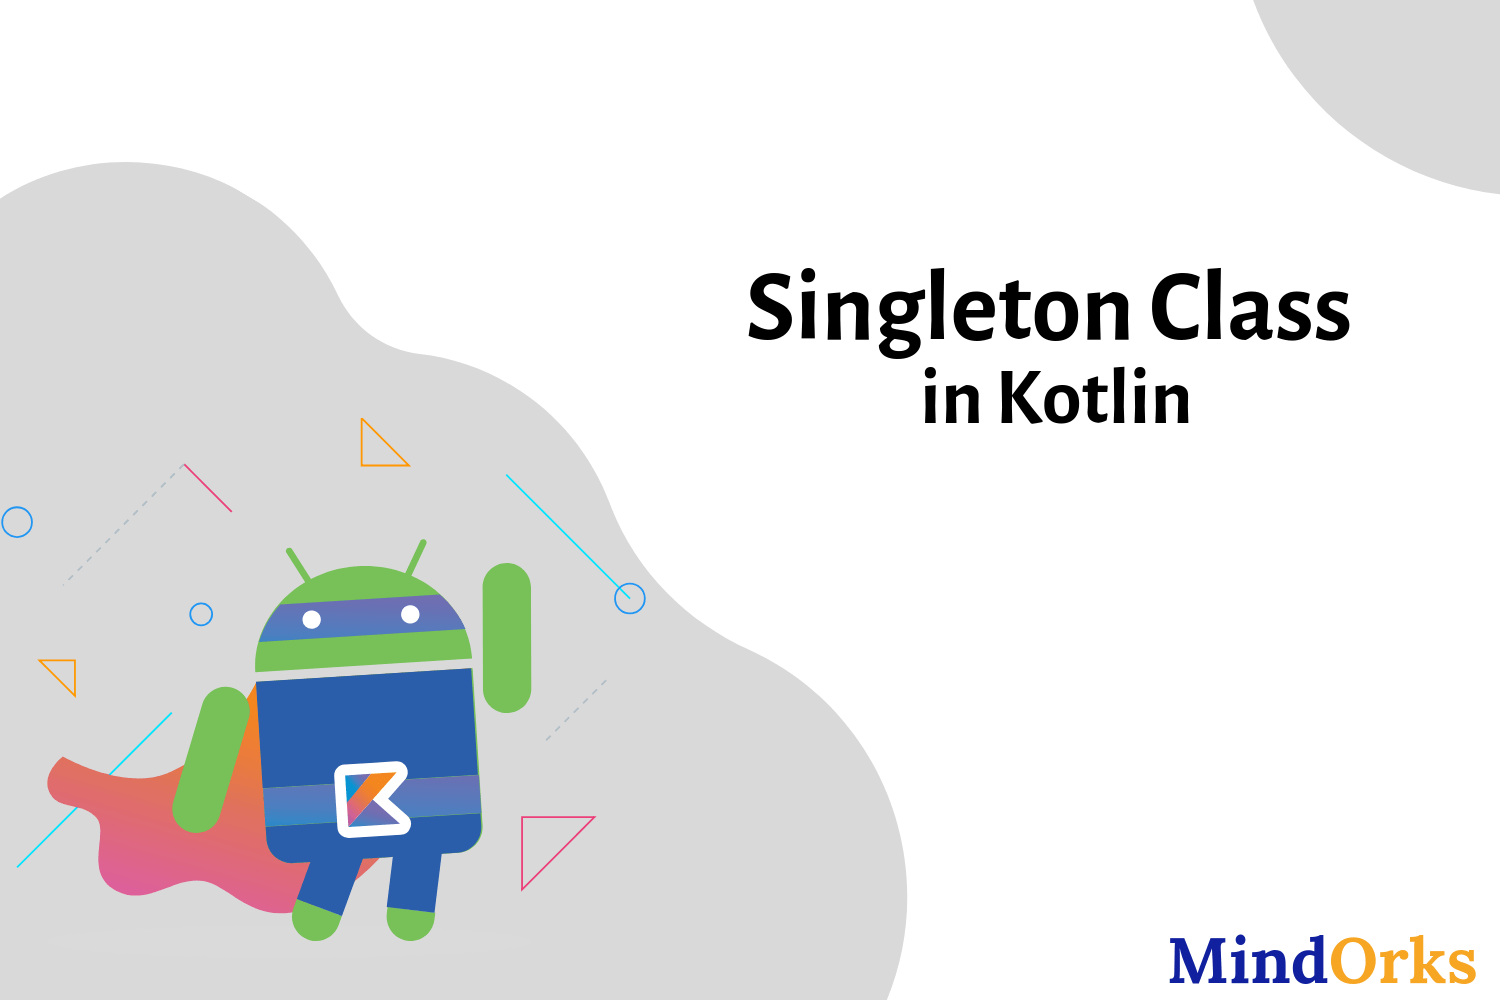 How to create a singleton class in Kotlin?